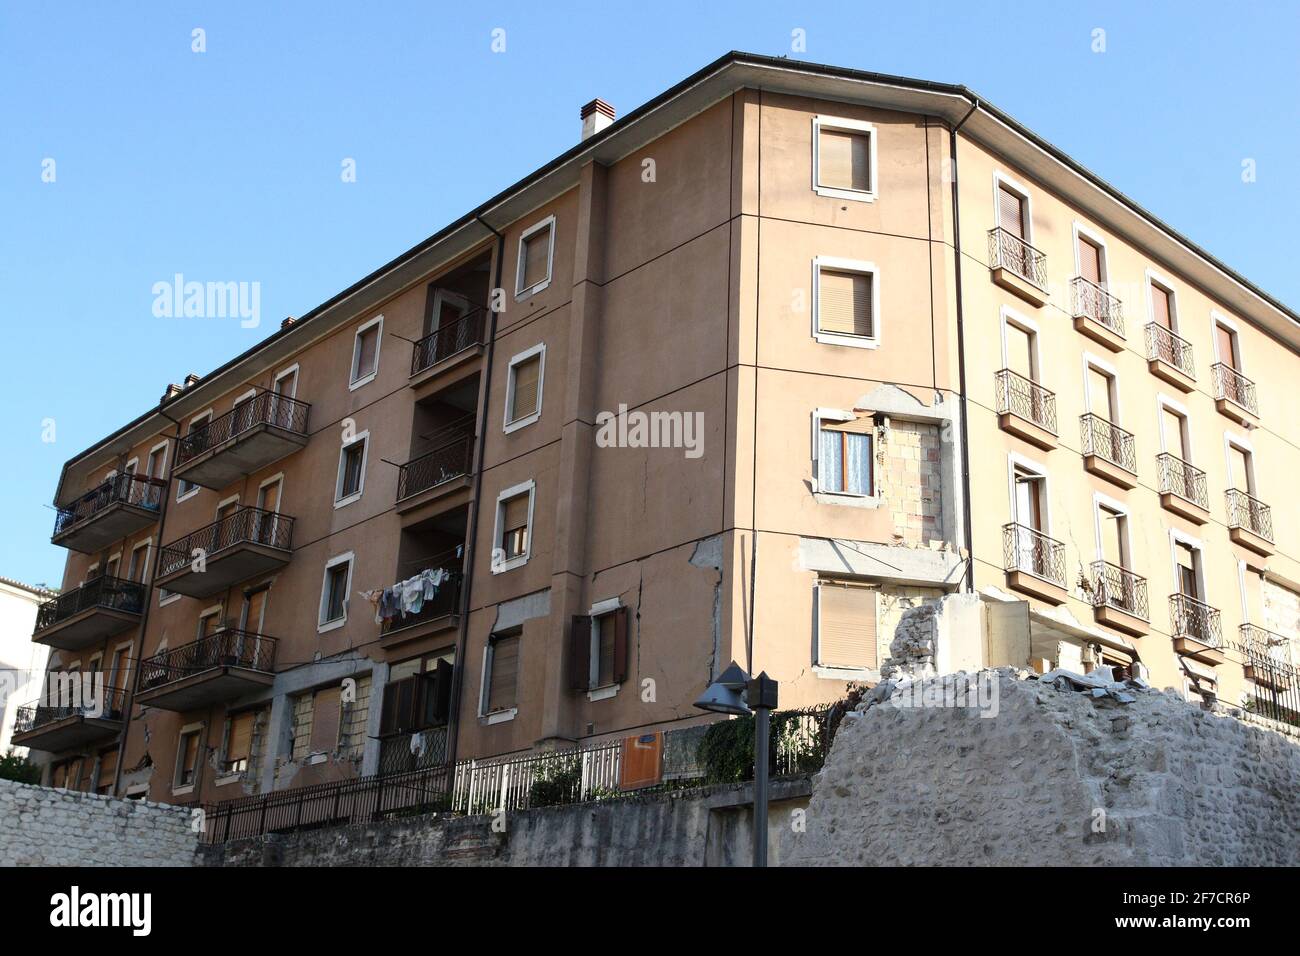 L'Aquila, Italy - July 9, 2009: The city destroyed by the earthquake Stock Photo